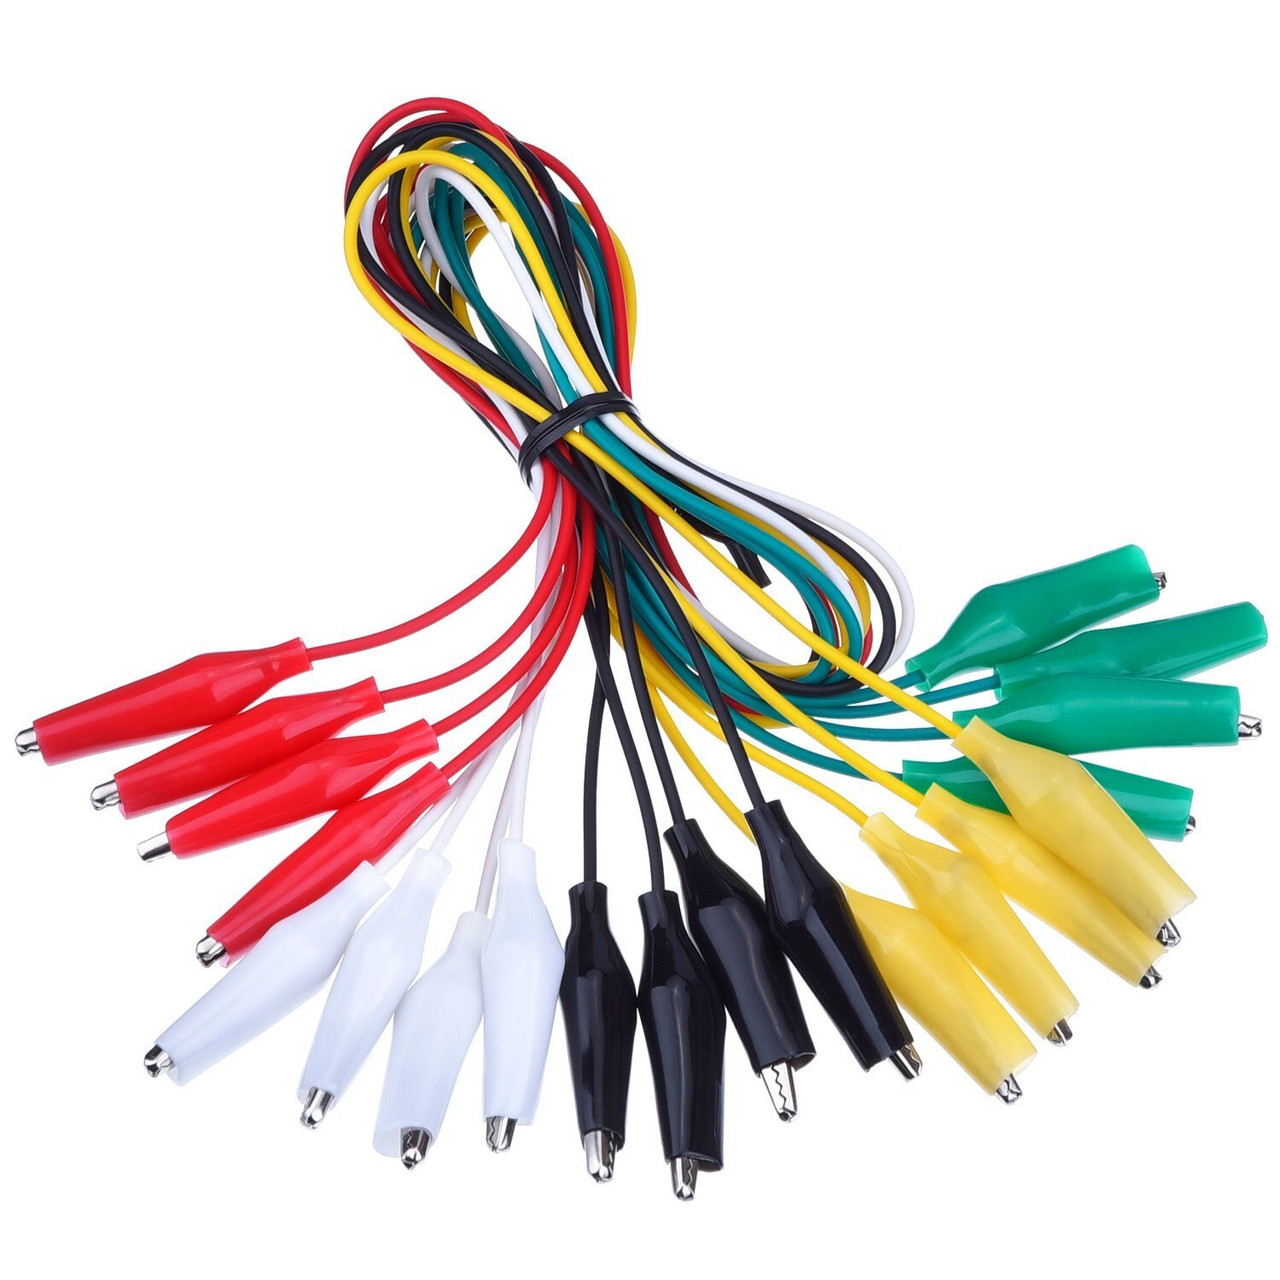 10pcs 20" Double Ended Test Leads Set Alligator Clip Leads Jumper Wires Cable 